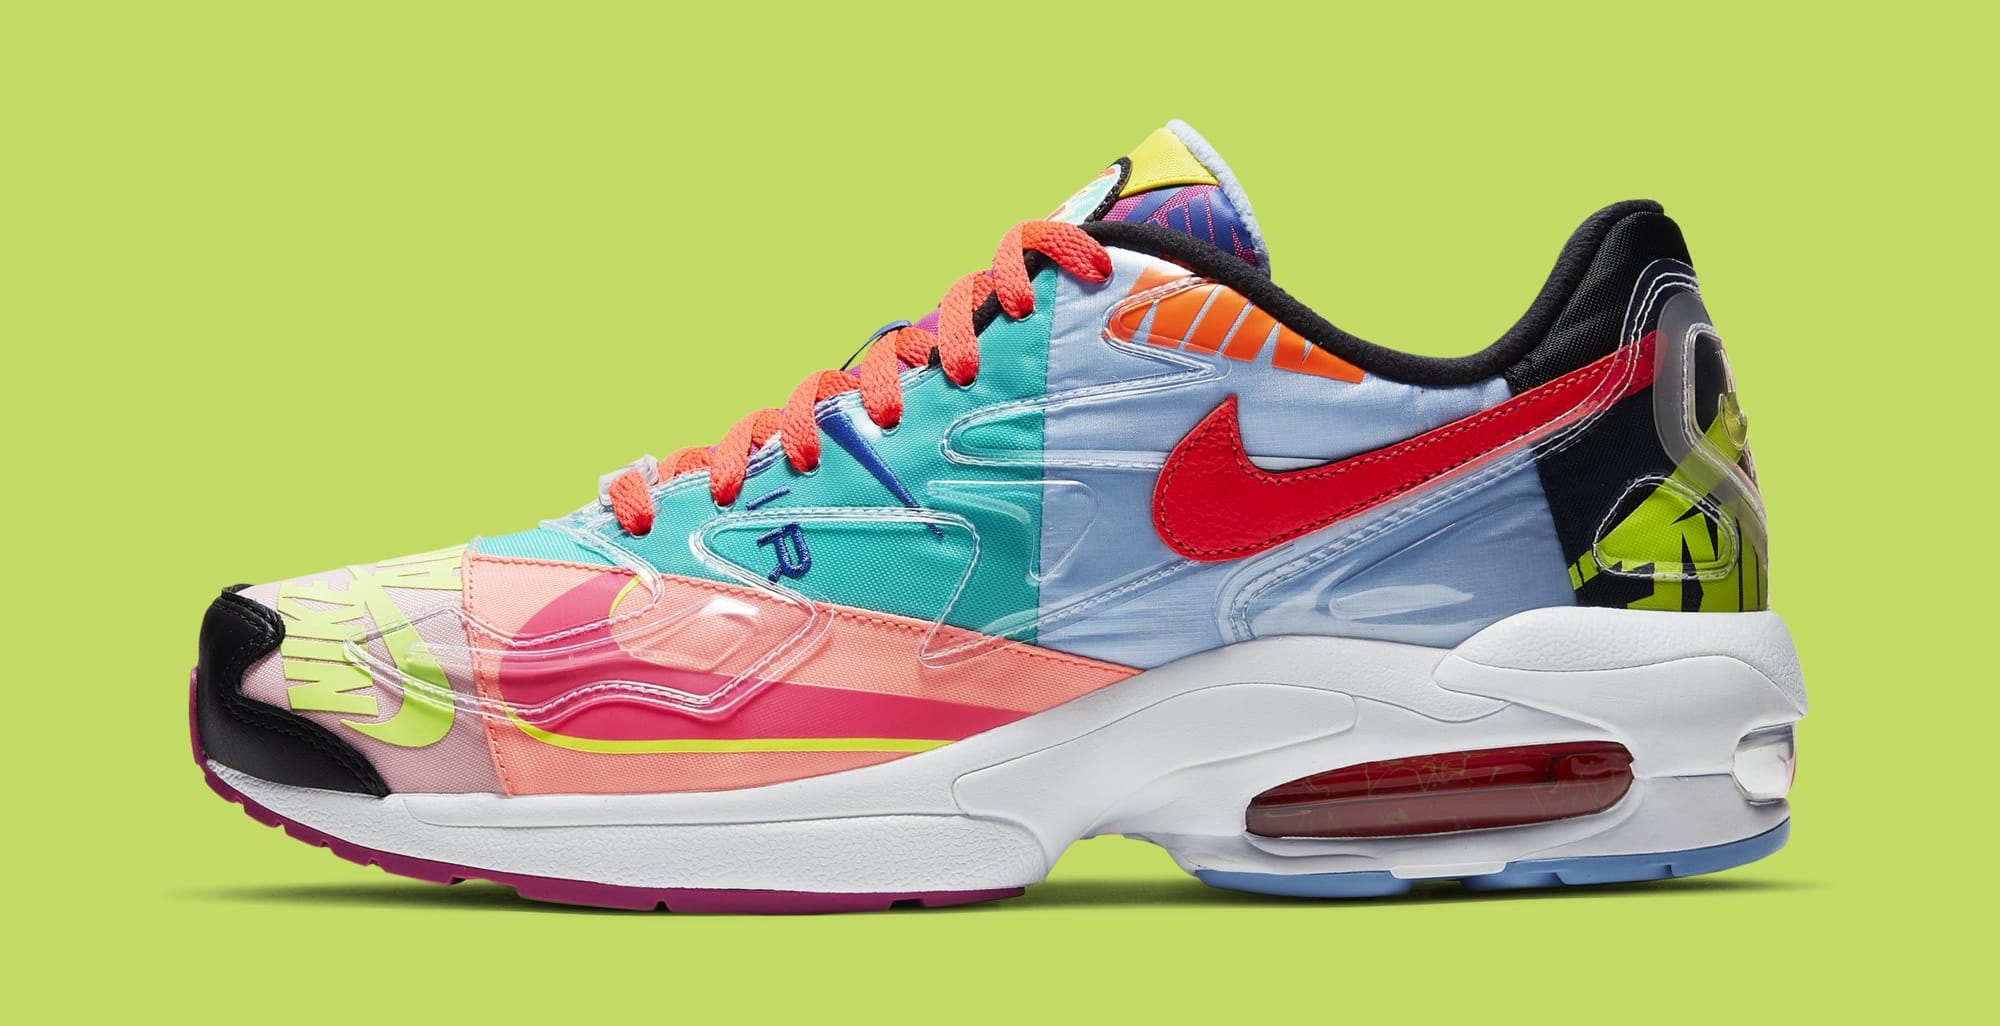 Straat Arab Twisted The Atmos x Nike Air Max2 Light Is Dropping Stateside Soon | Complex